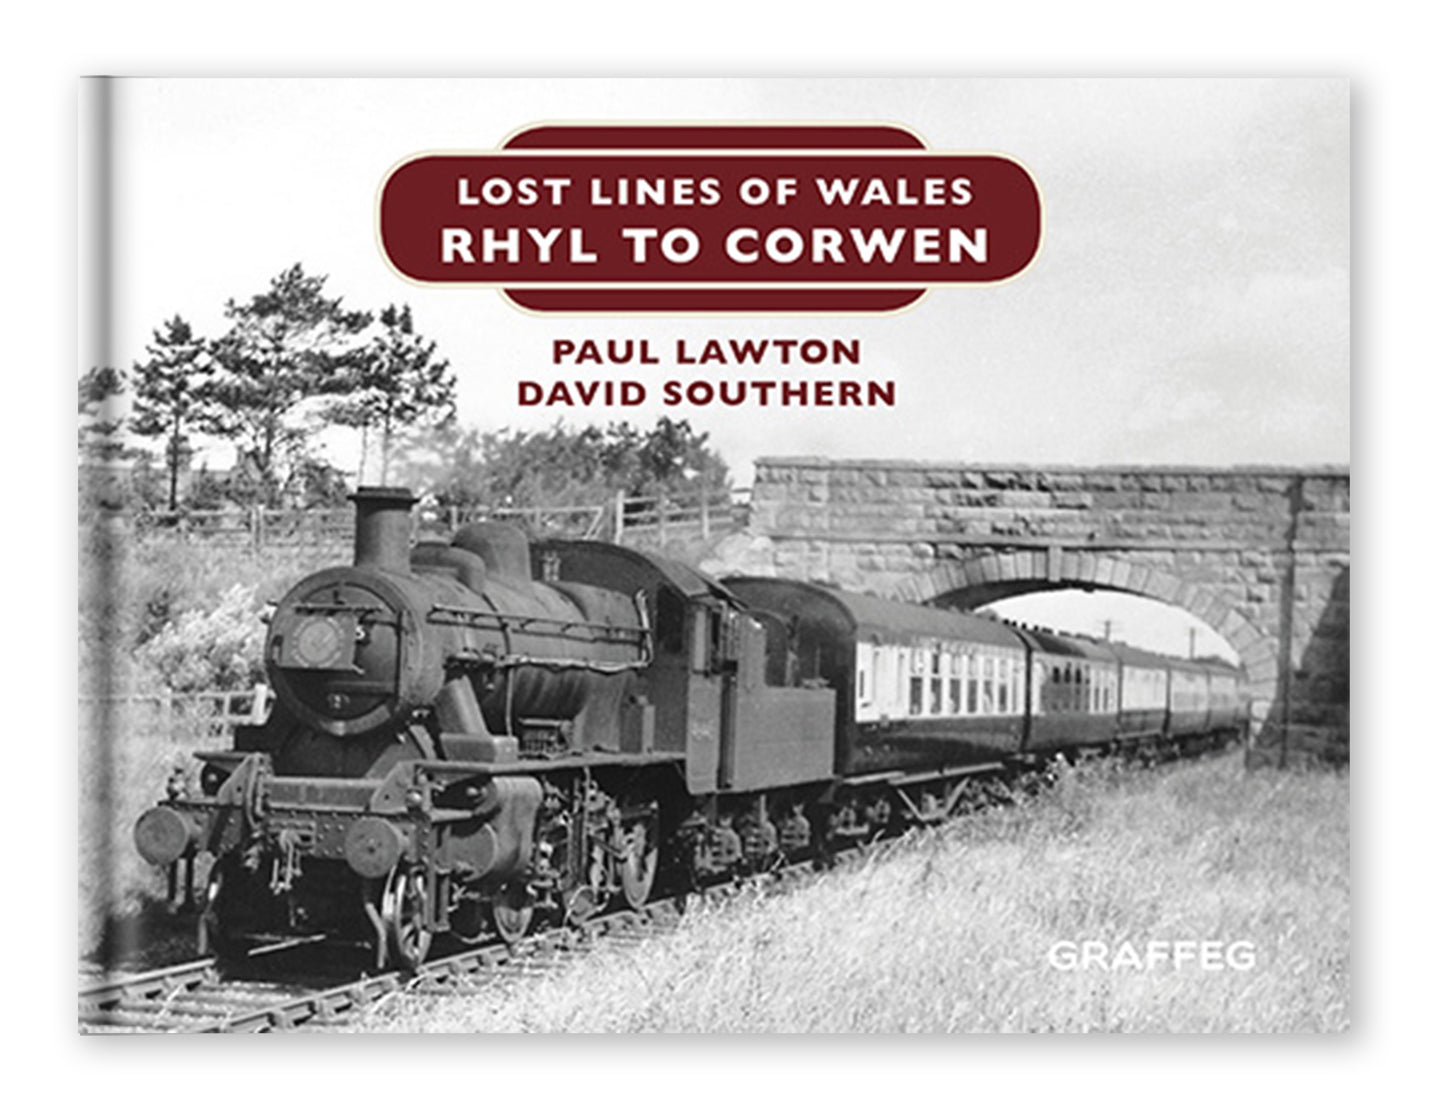 Lost Lines of Wales: Rhyl to Corwen by Paul Lawton and David Southern, published by Graffeg